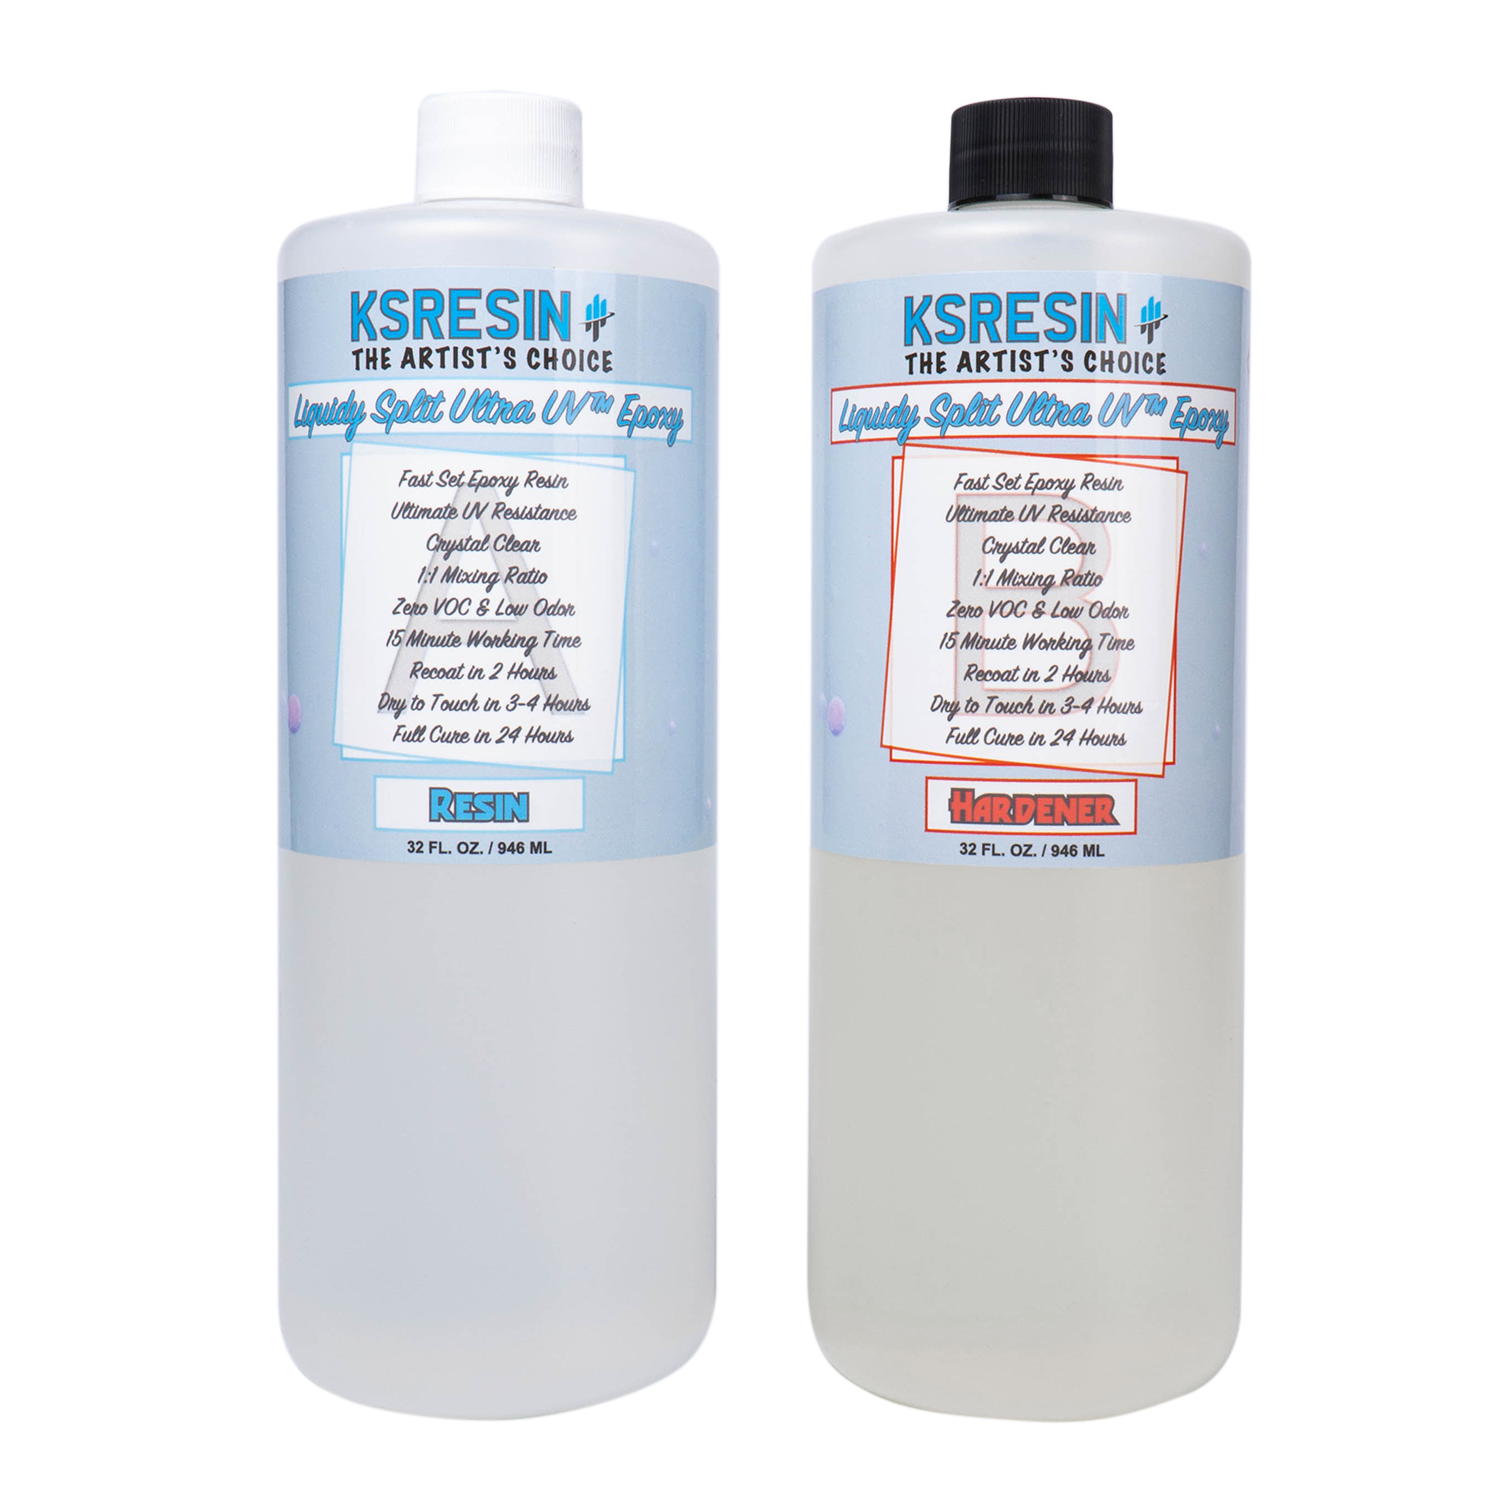 UV Cure Epoxy Resin - 1 Part System Fast Cure - Industrial Grade